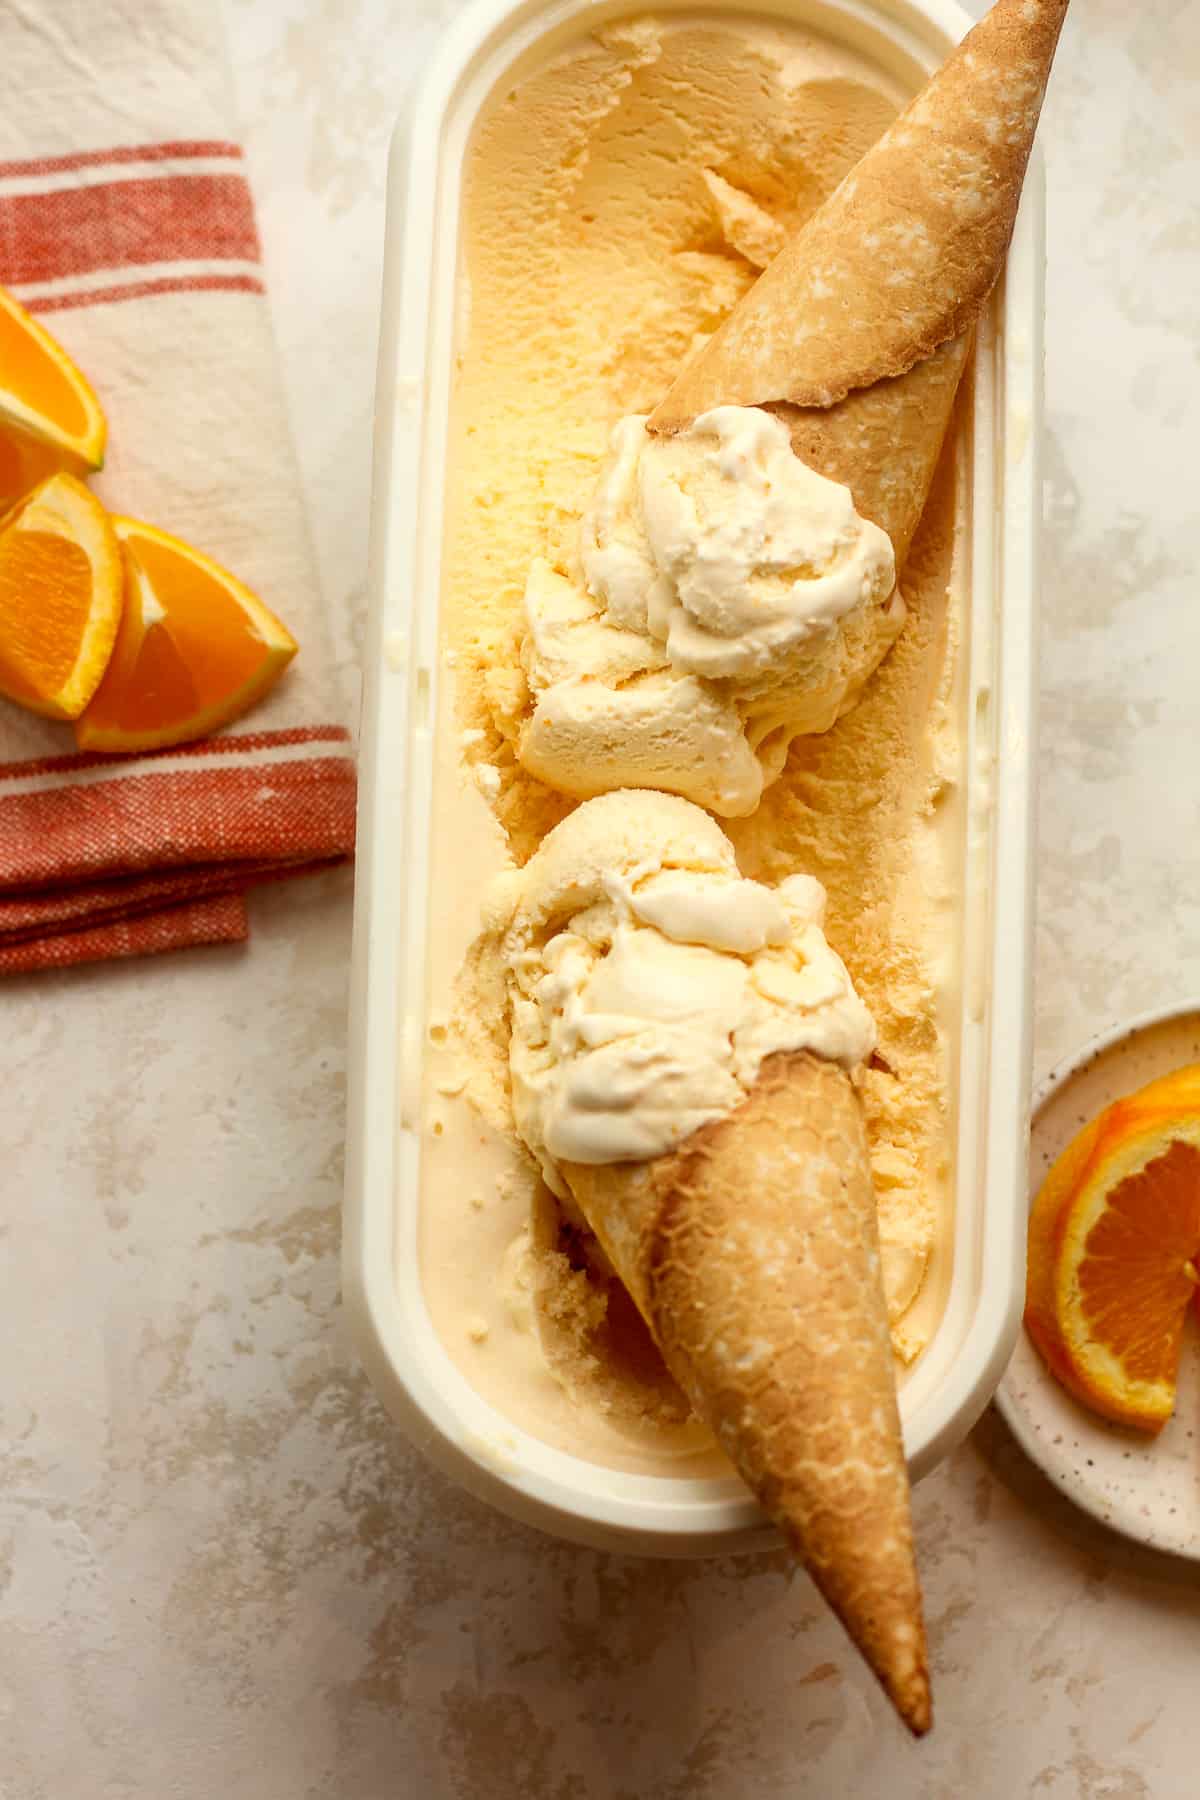 An oblong container of orange ice cream cones inside.